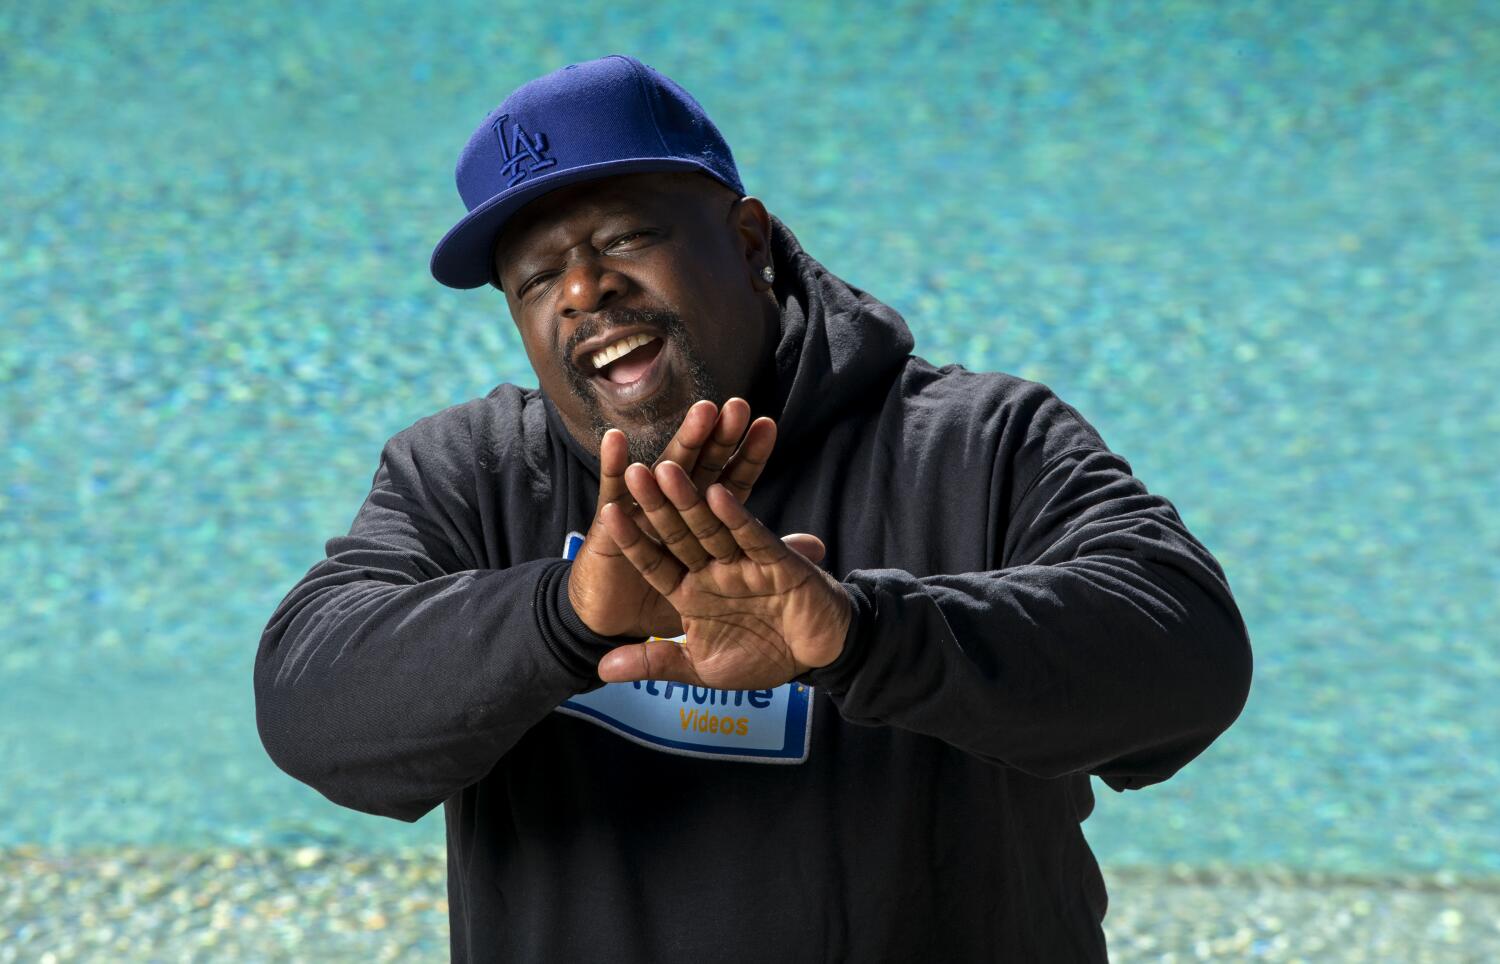 cedric the entertainer uses his punchlines to branch out and give back during netflix is a joke